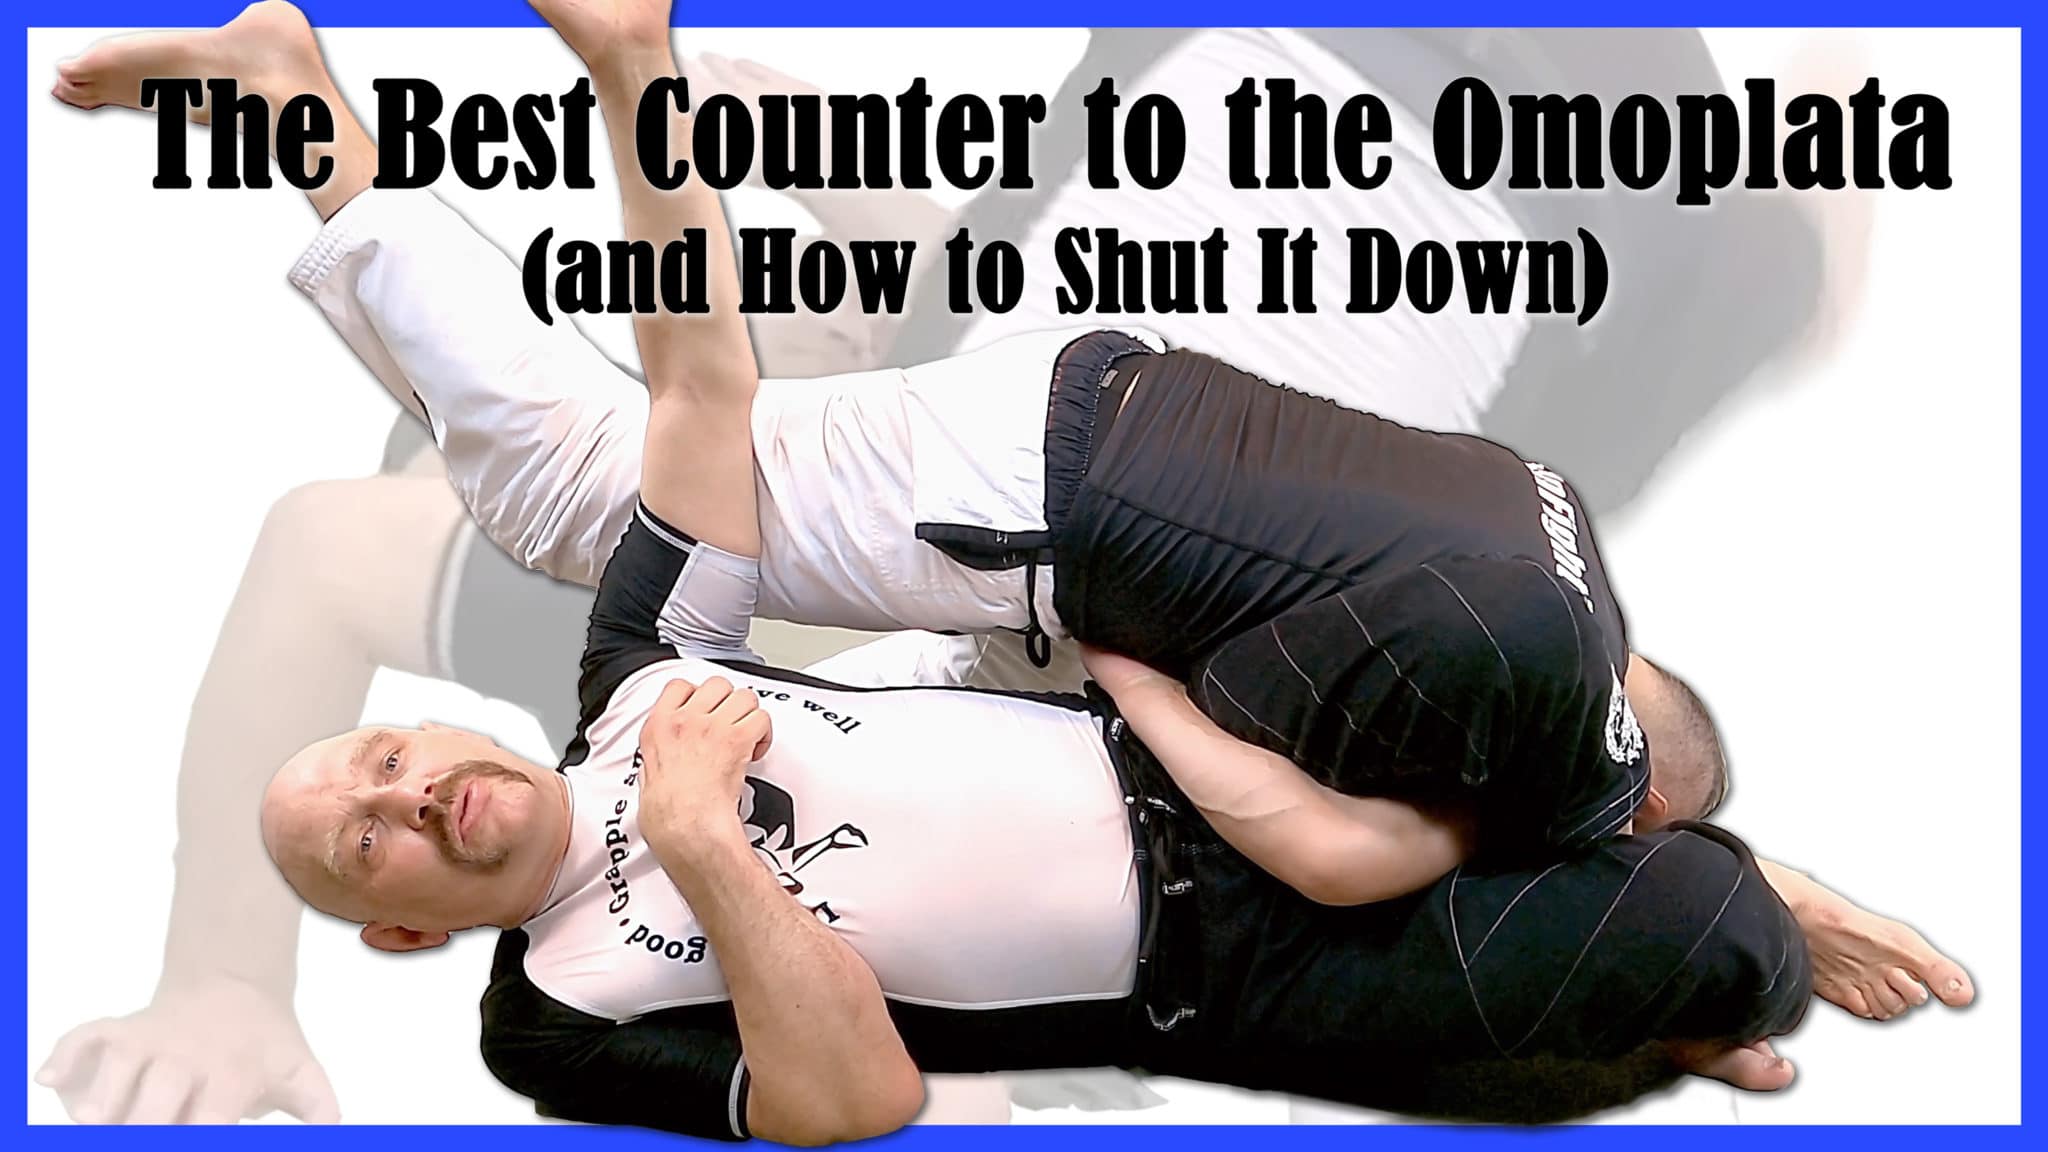 The Best Counter to the Omoplata